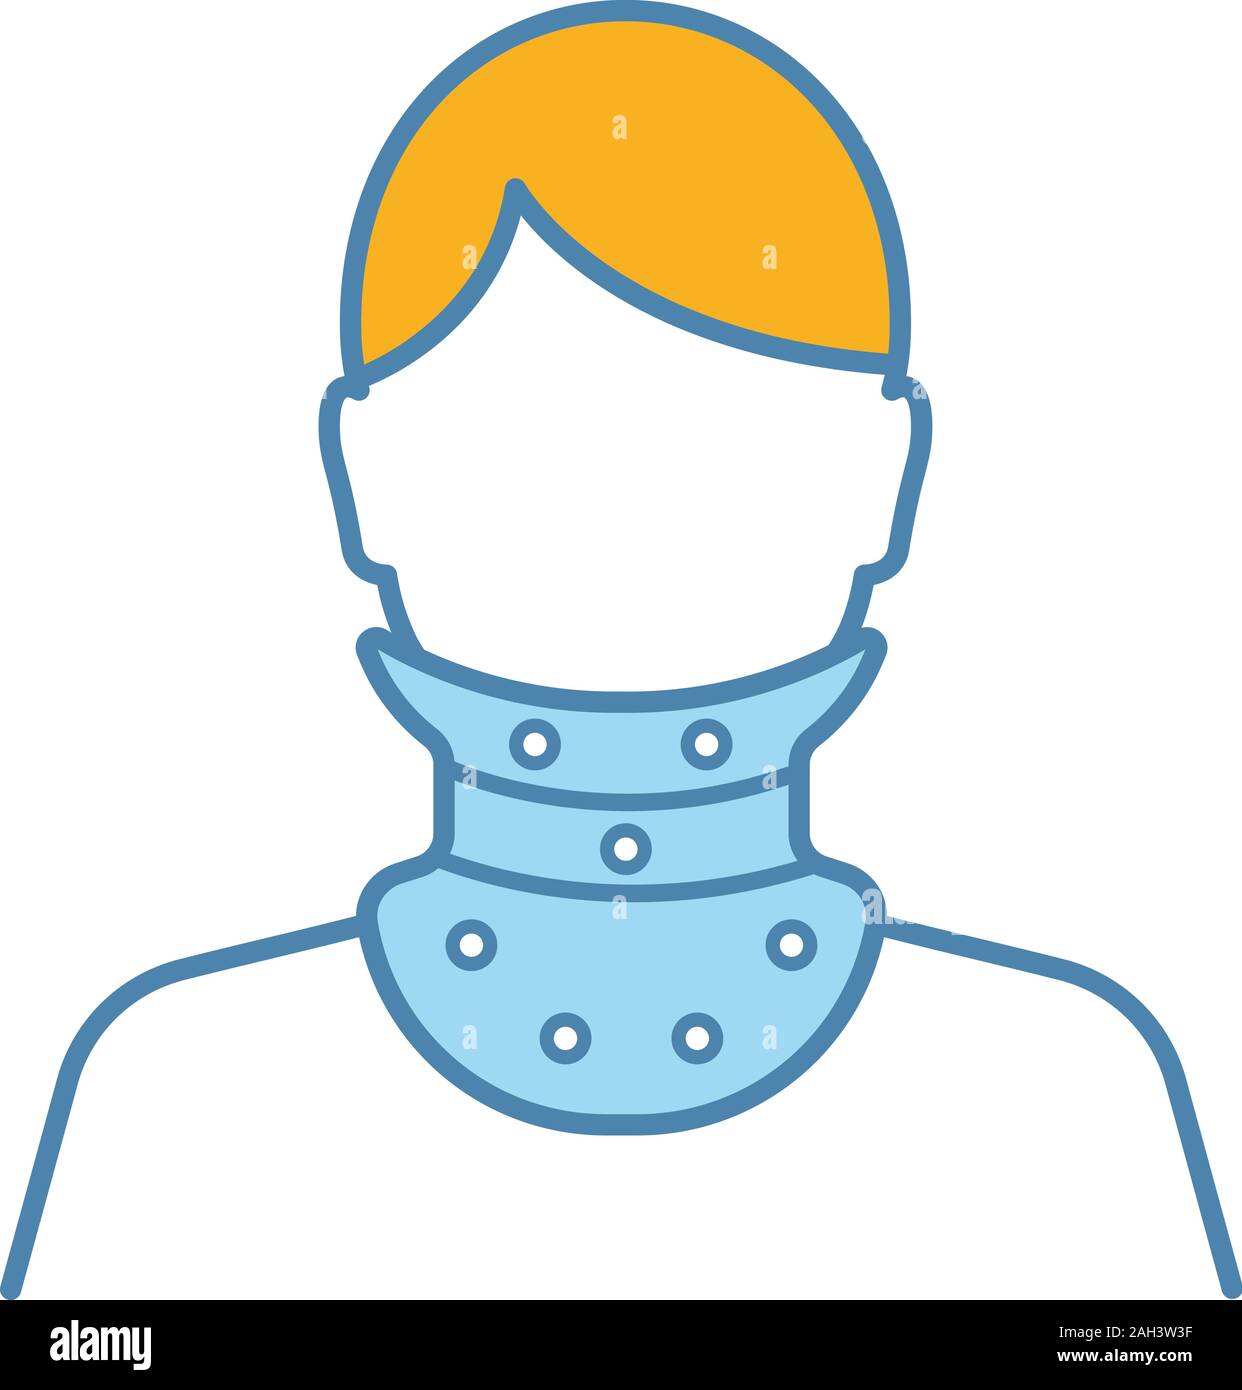 Cervical collar color icon. Neck brace. Medical plastic neck support. Orthopedic collar. Cervical spine stabilization. Traumatic head and neck injurie Stock Vector